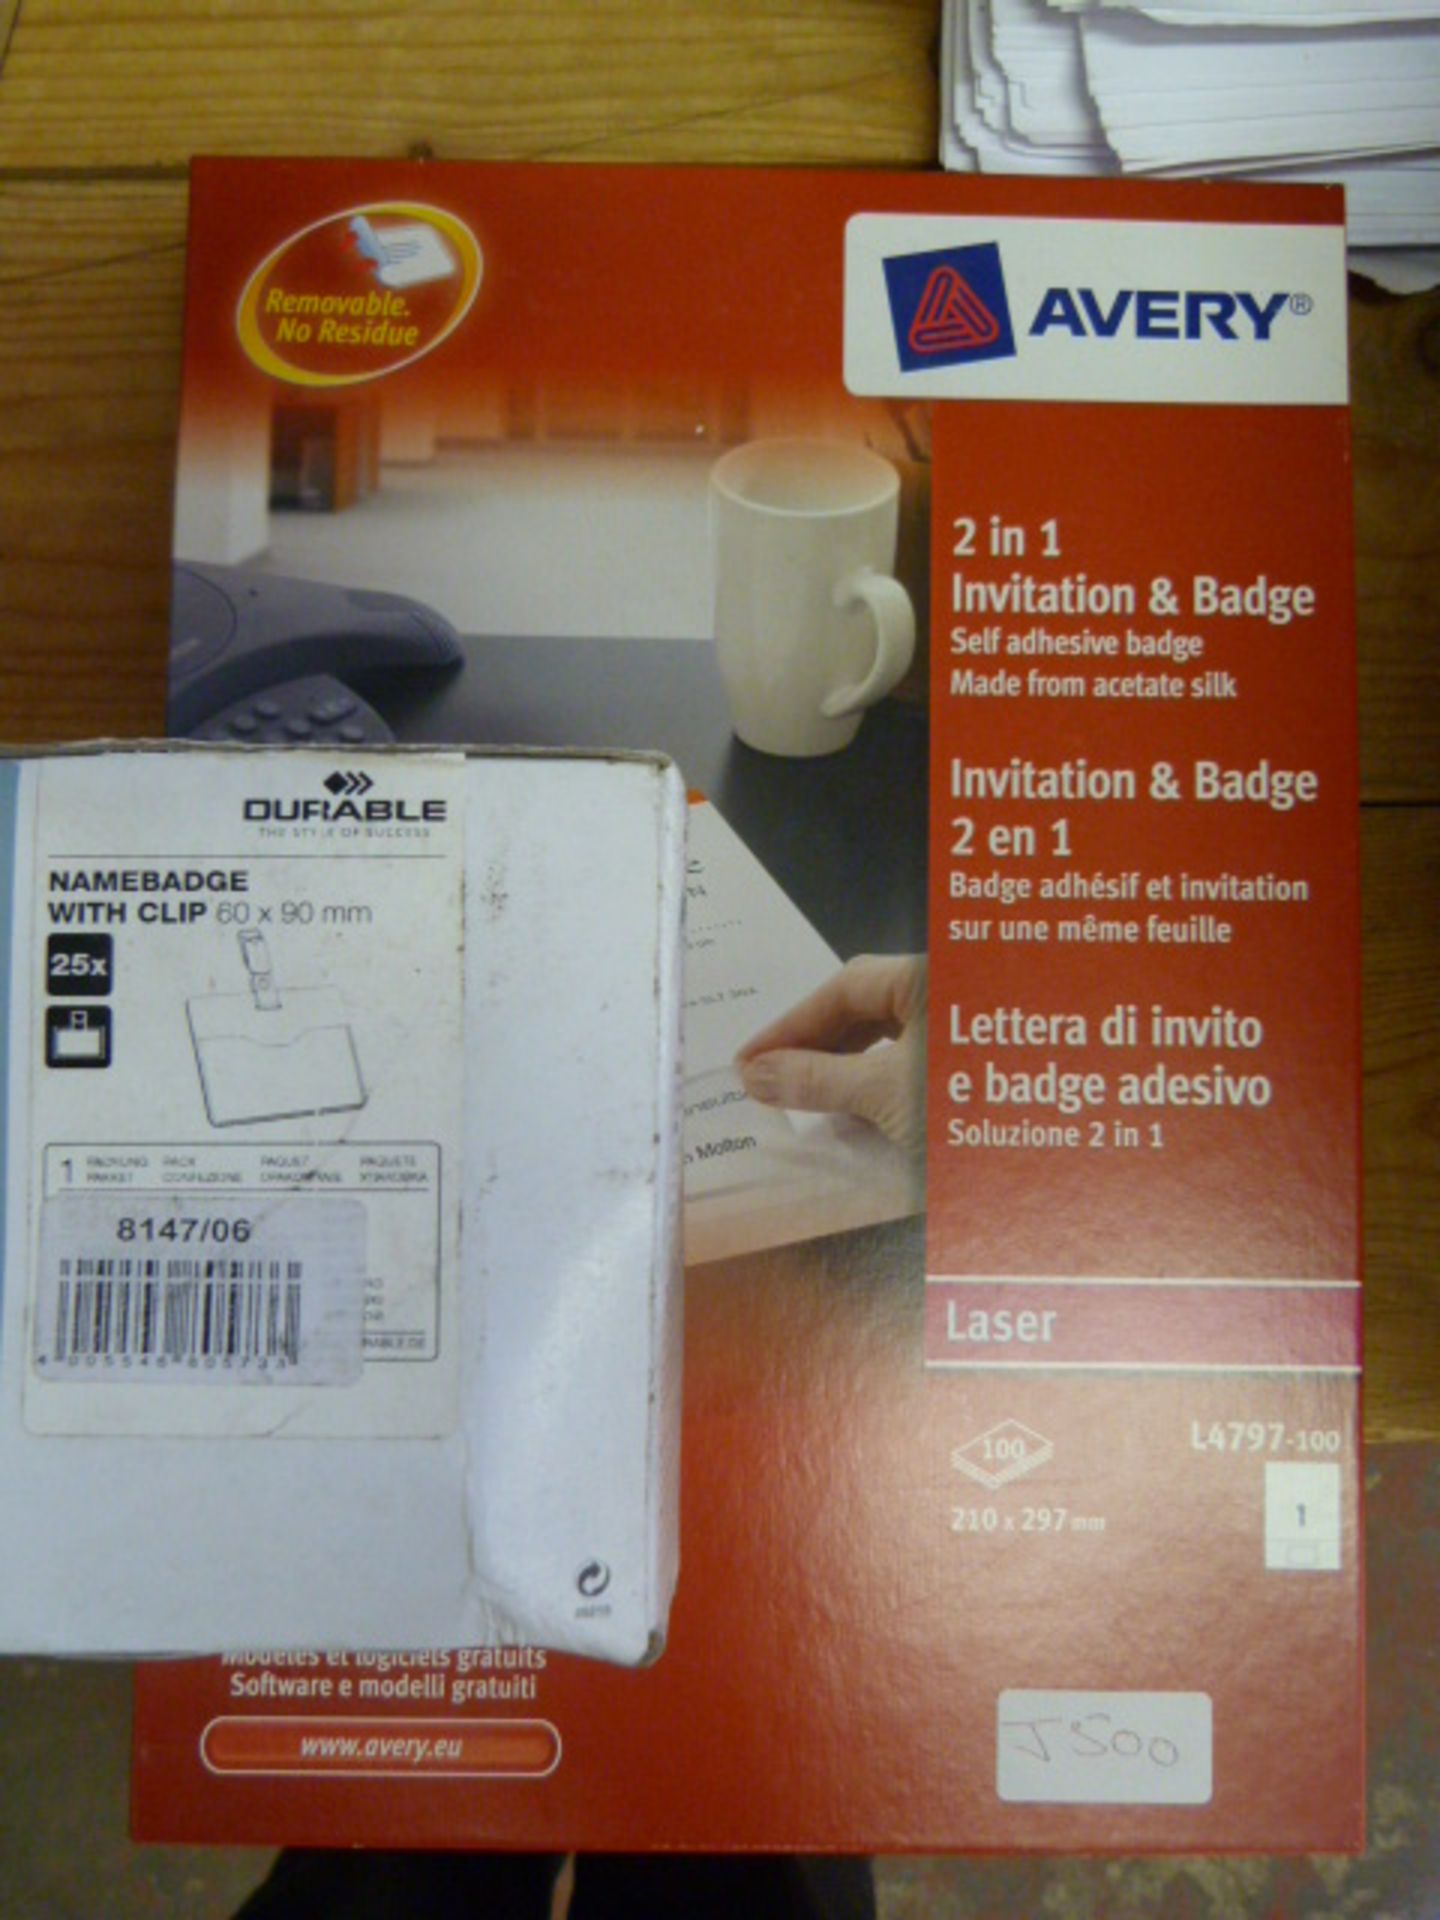 Box of 2-in-1 Avery Label Kits and a Box of Name T